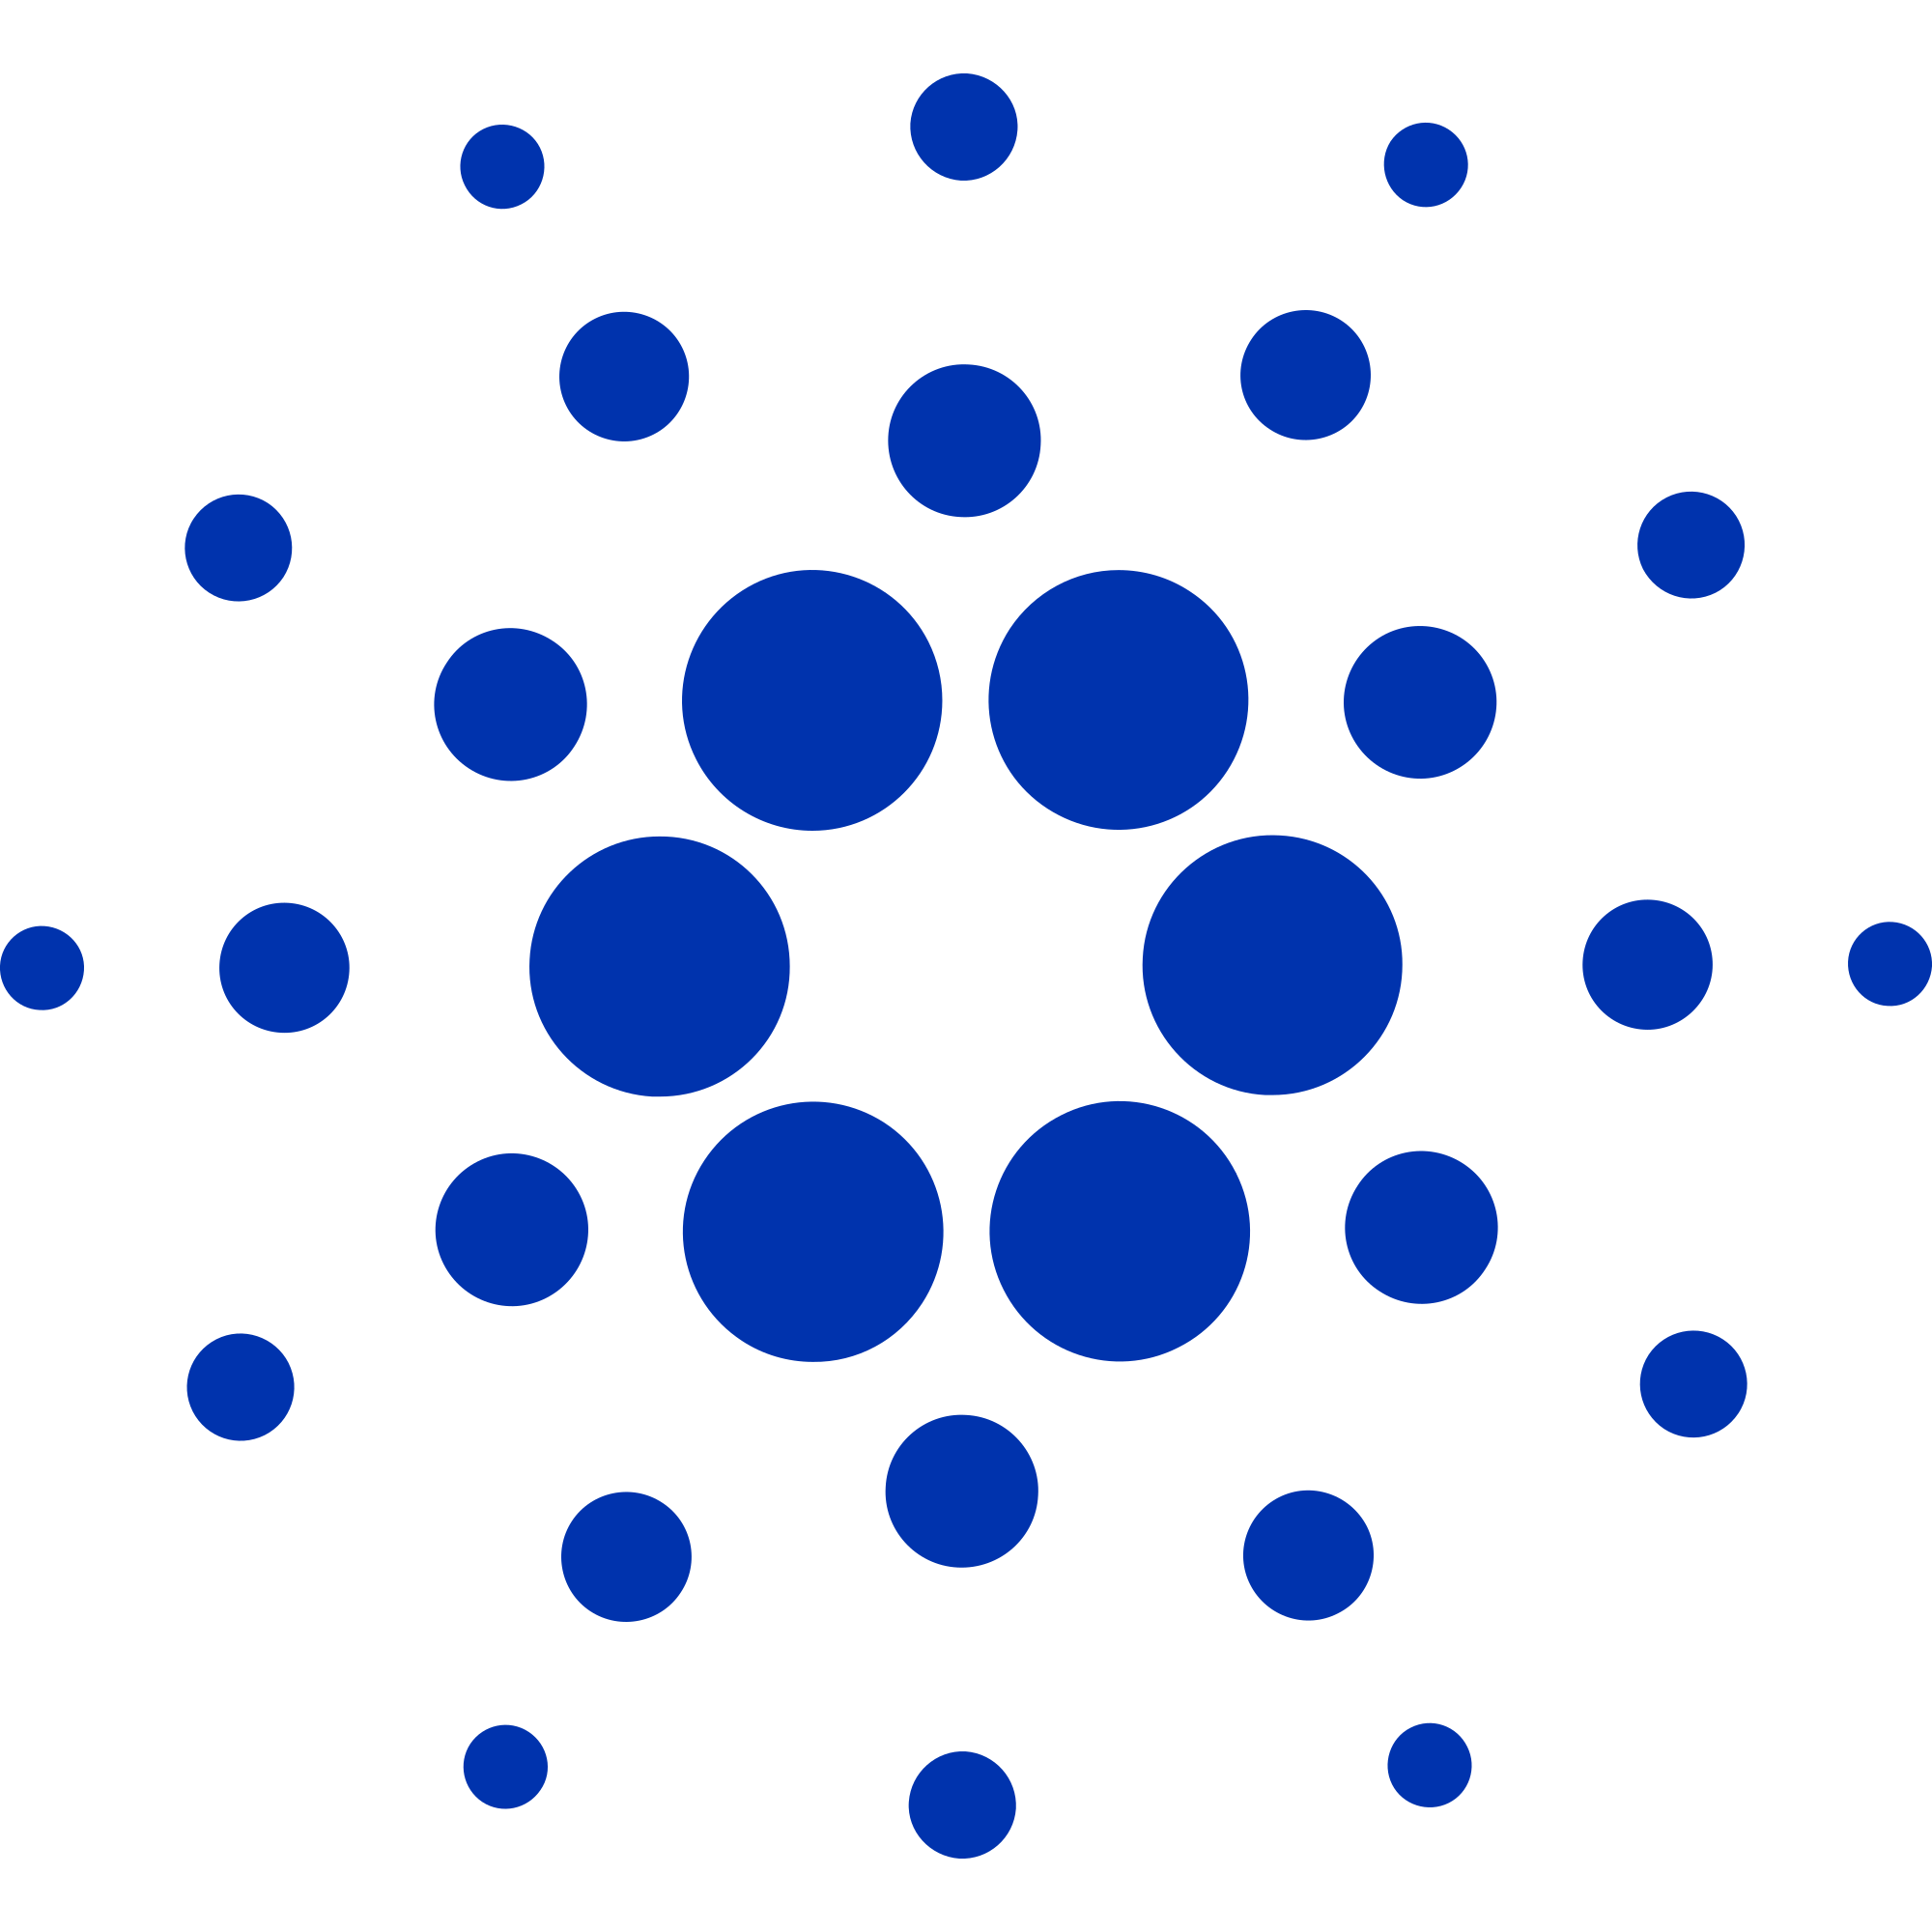 Cardano (ADA) Logo .SVG and .PNG Files Download